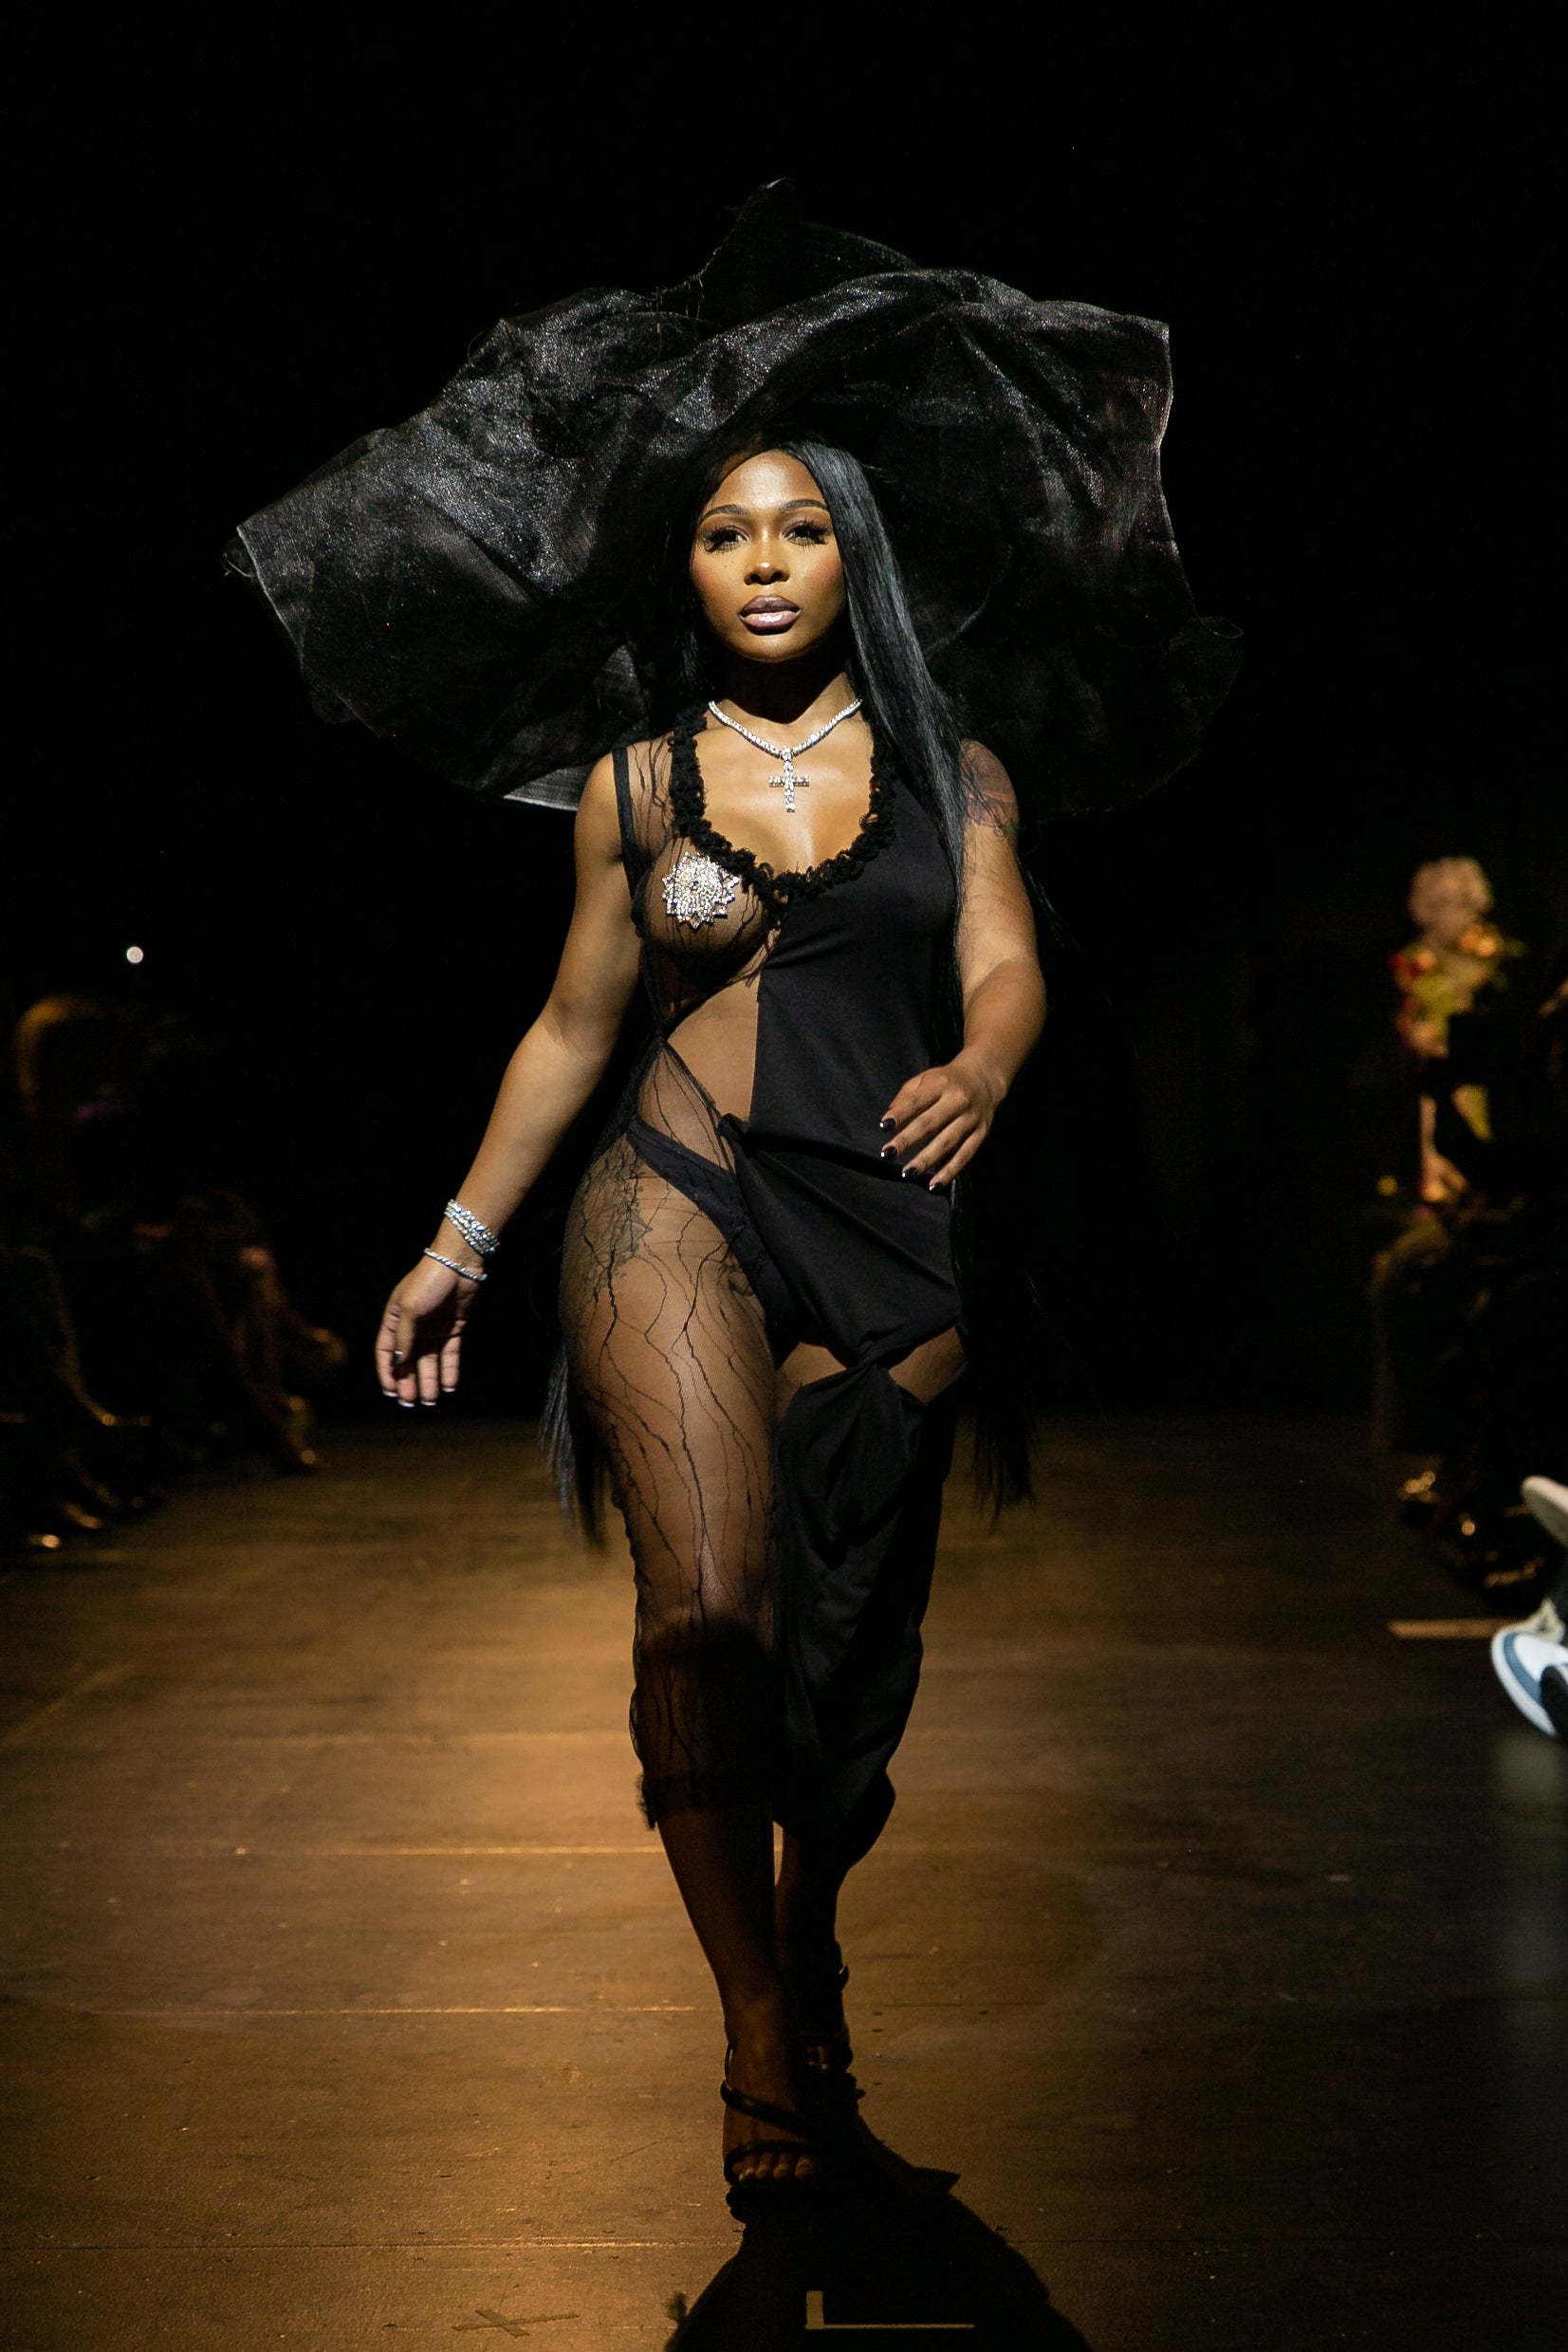 Tia Adeola Pays Tribute To Thierry Mugler And Old Hollywood Films